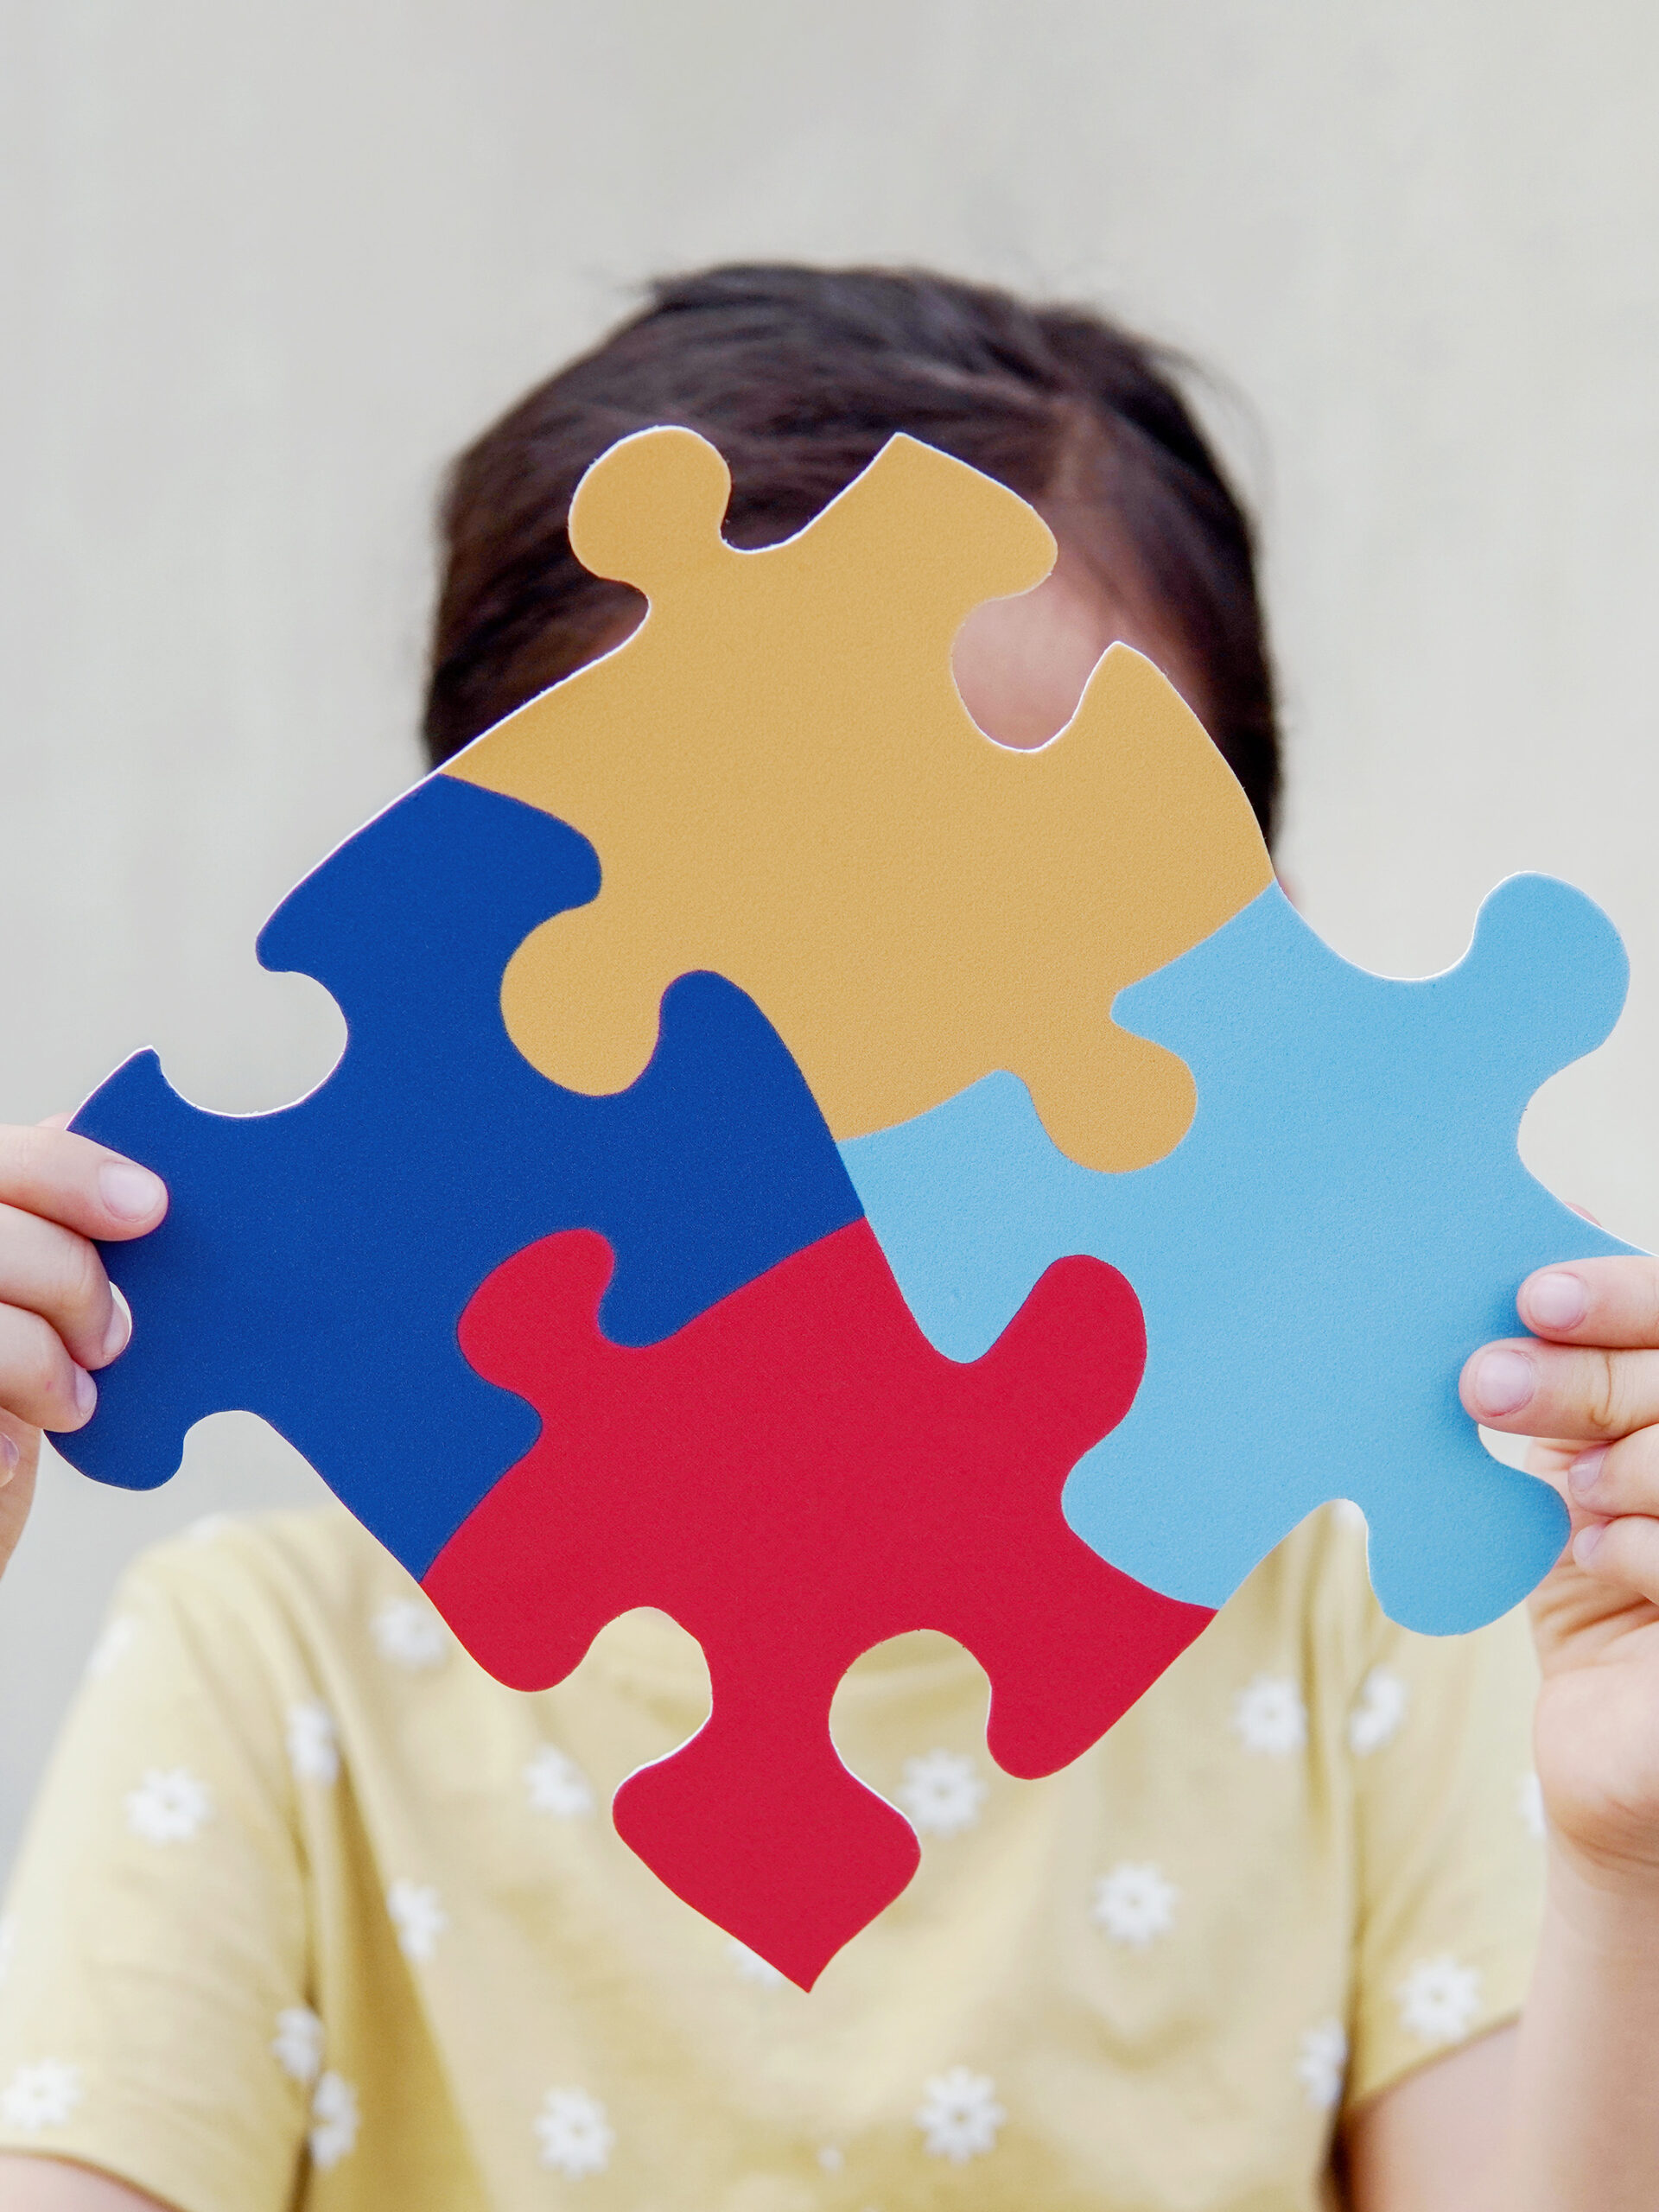 Child holds autism awareness puzzle pieces